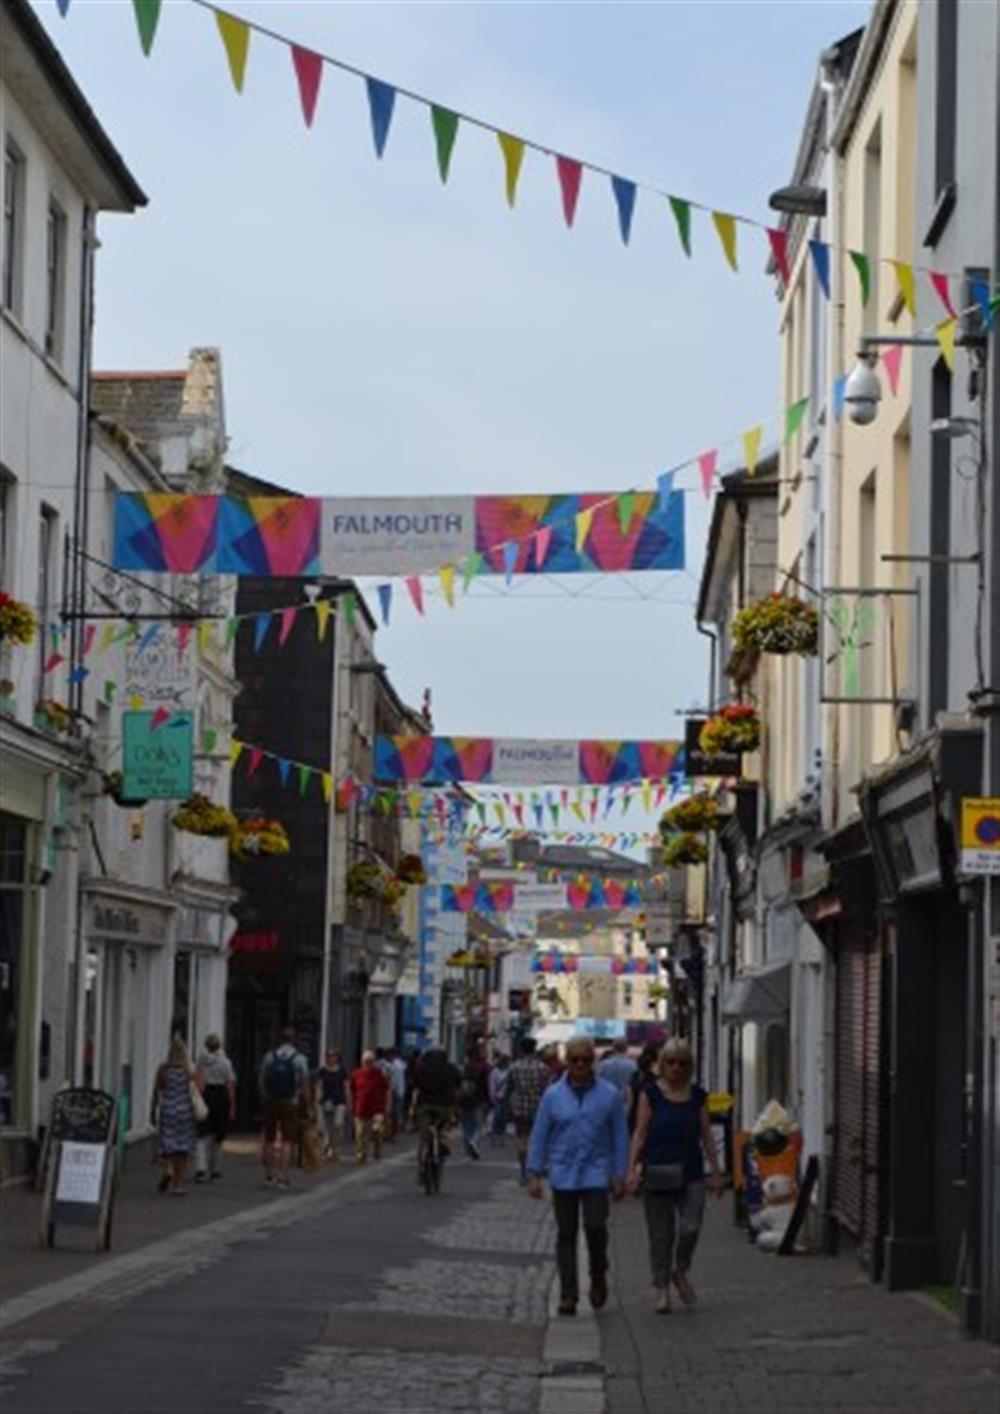 Falmouth town has an array of shops, plus a range of restaurants, cafes and art galleries.